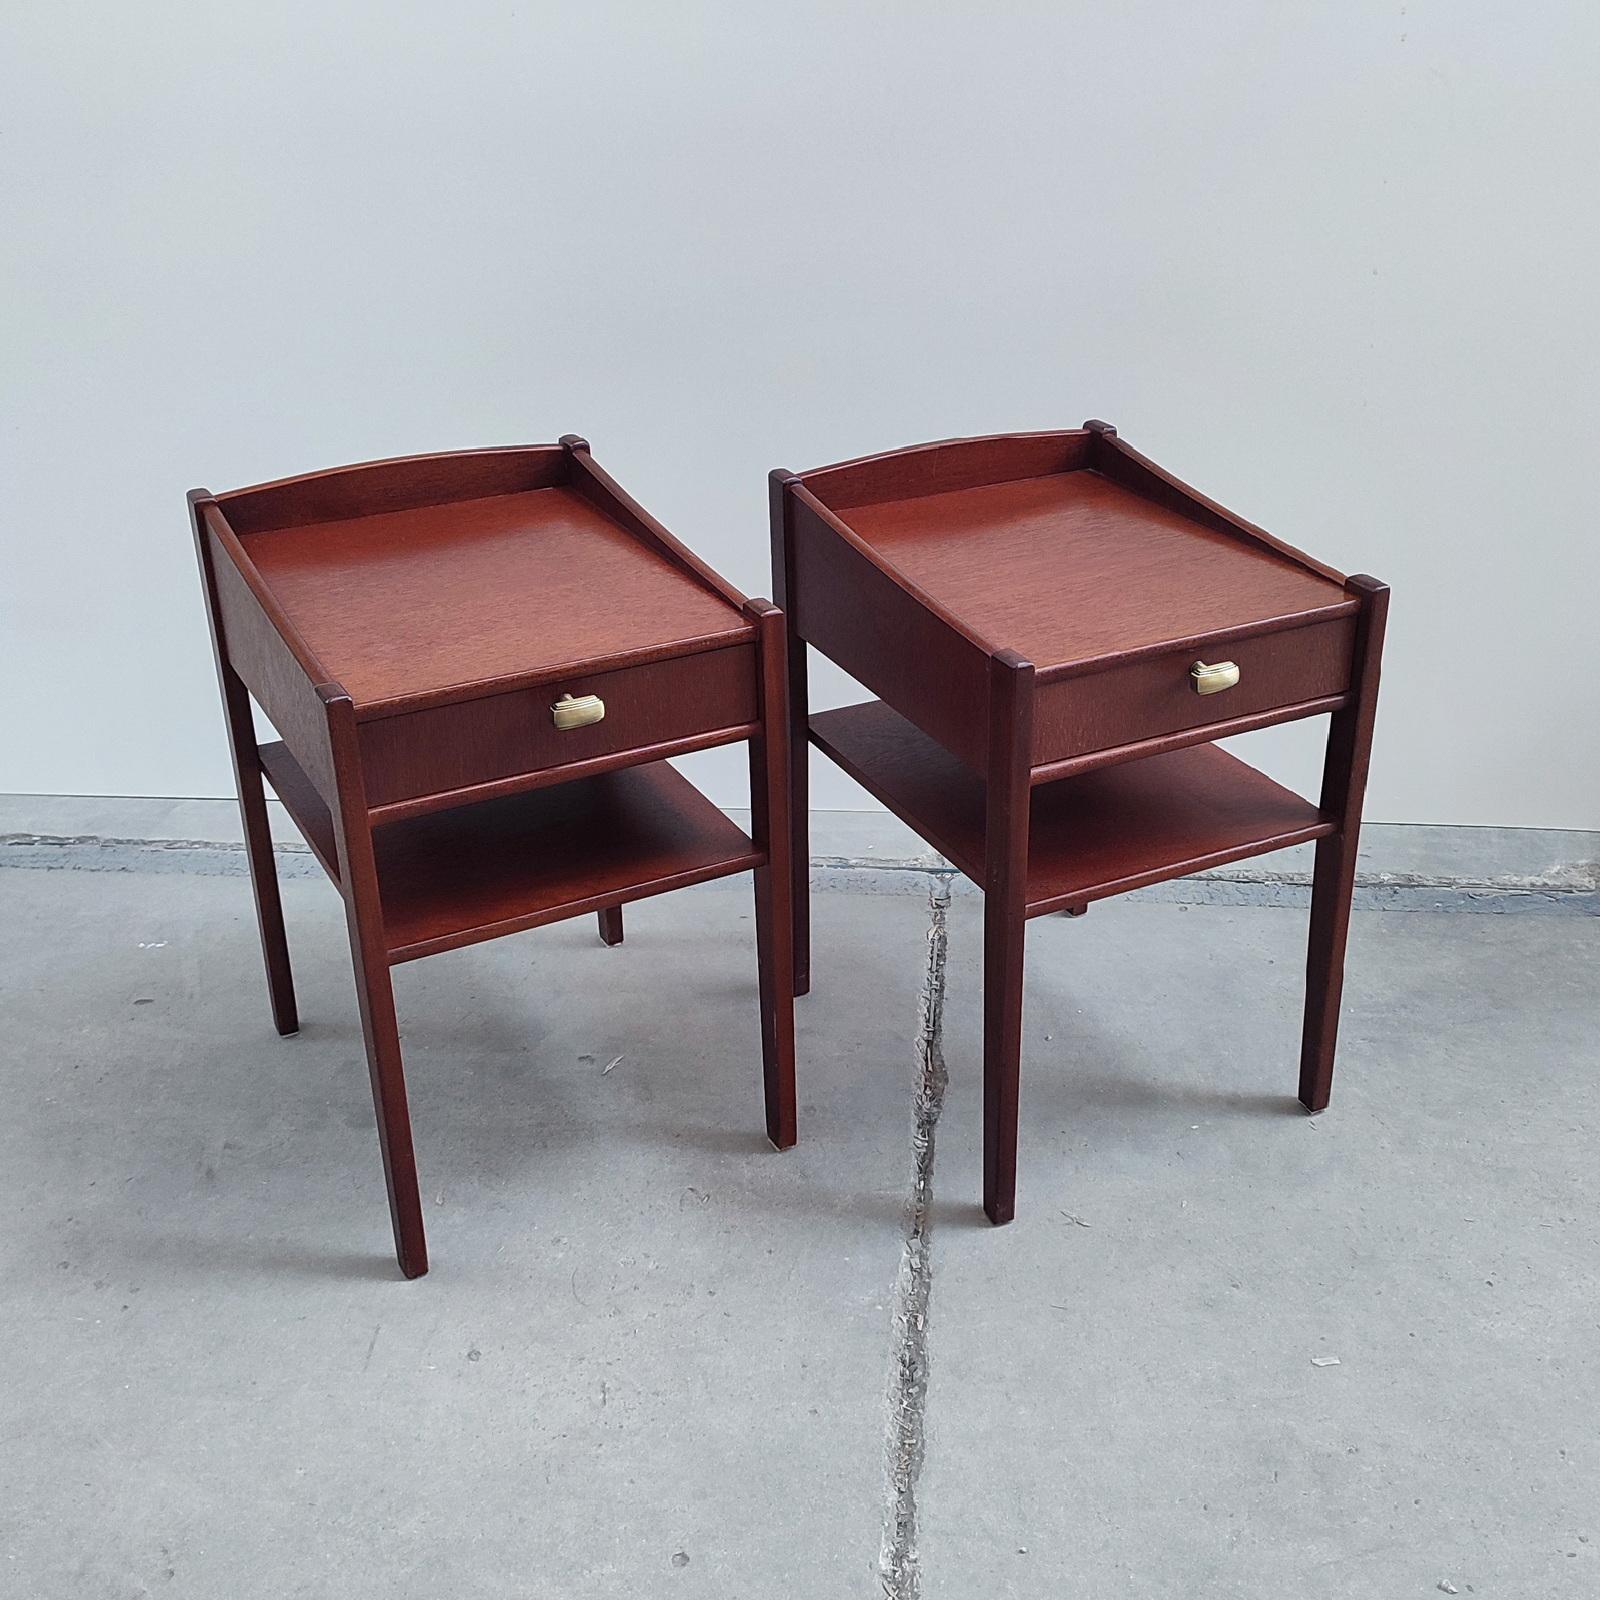 A pair of mahogany nightstands or side tables with top drawer and lower shelf.
Asymmetric sides, resembling in design to Kerstin Horlin Holmquist's furniture pieces. In good overall condition, normal wear and few tears. They have been